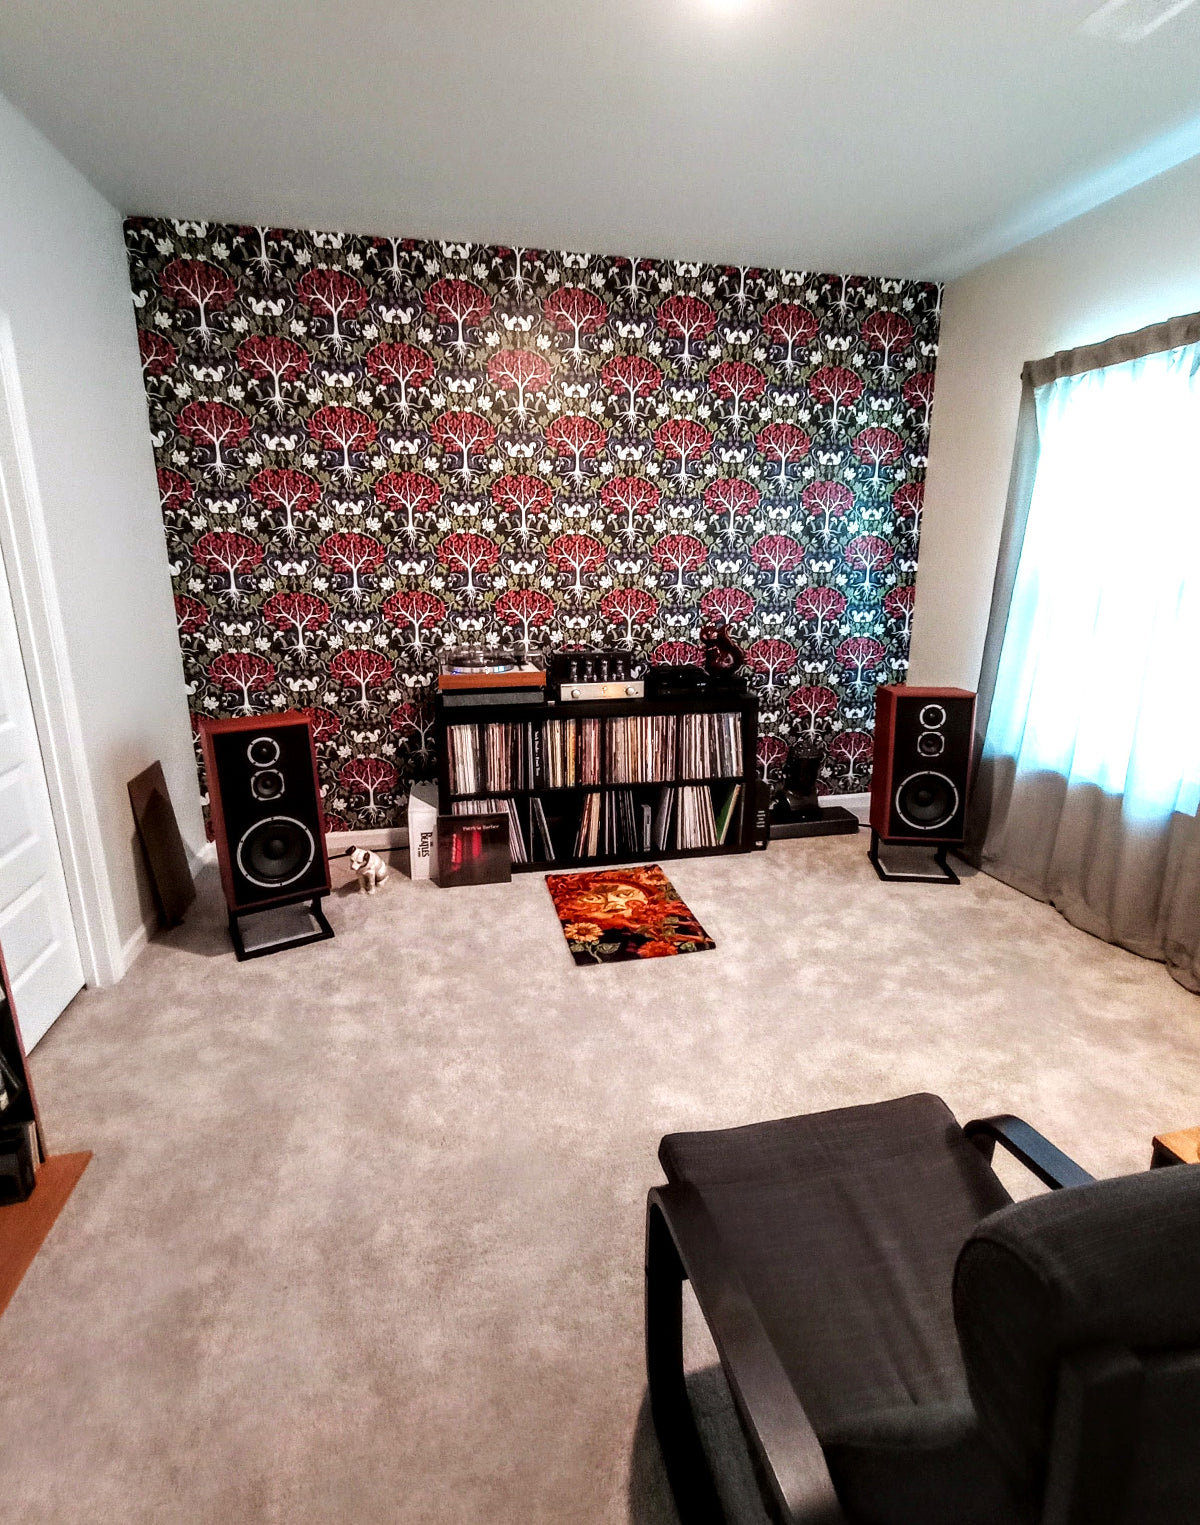 The analog room is still a work in progress, but the sound quality is shockingly good, even without any acoustic panels.